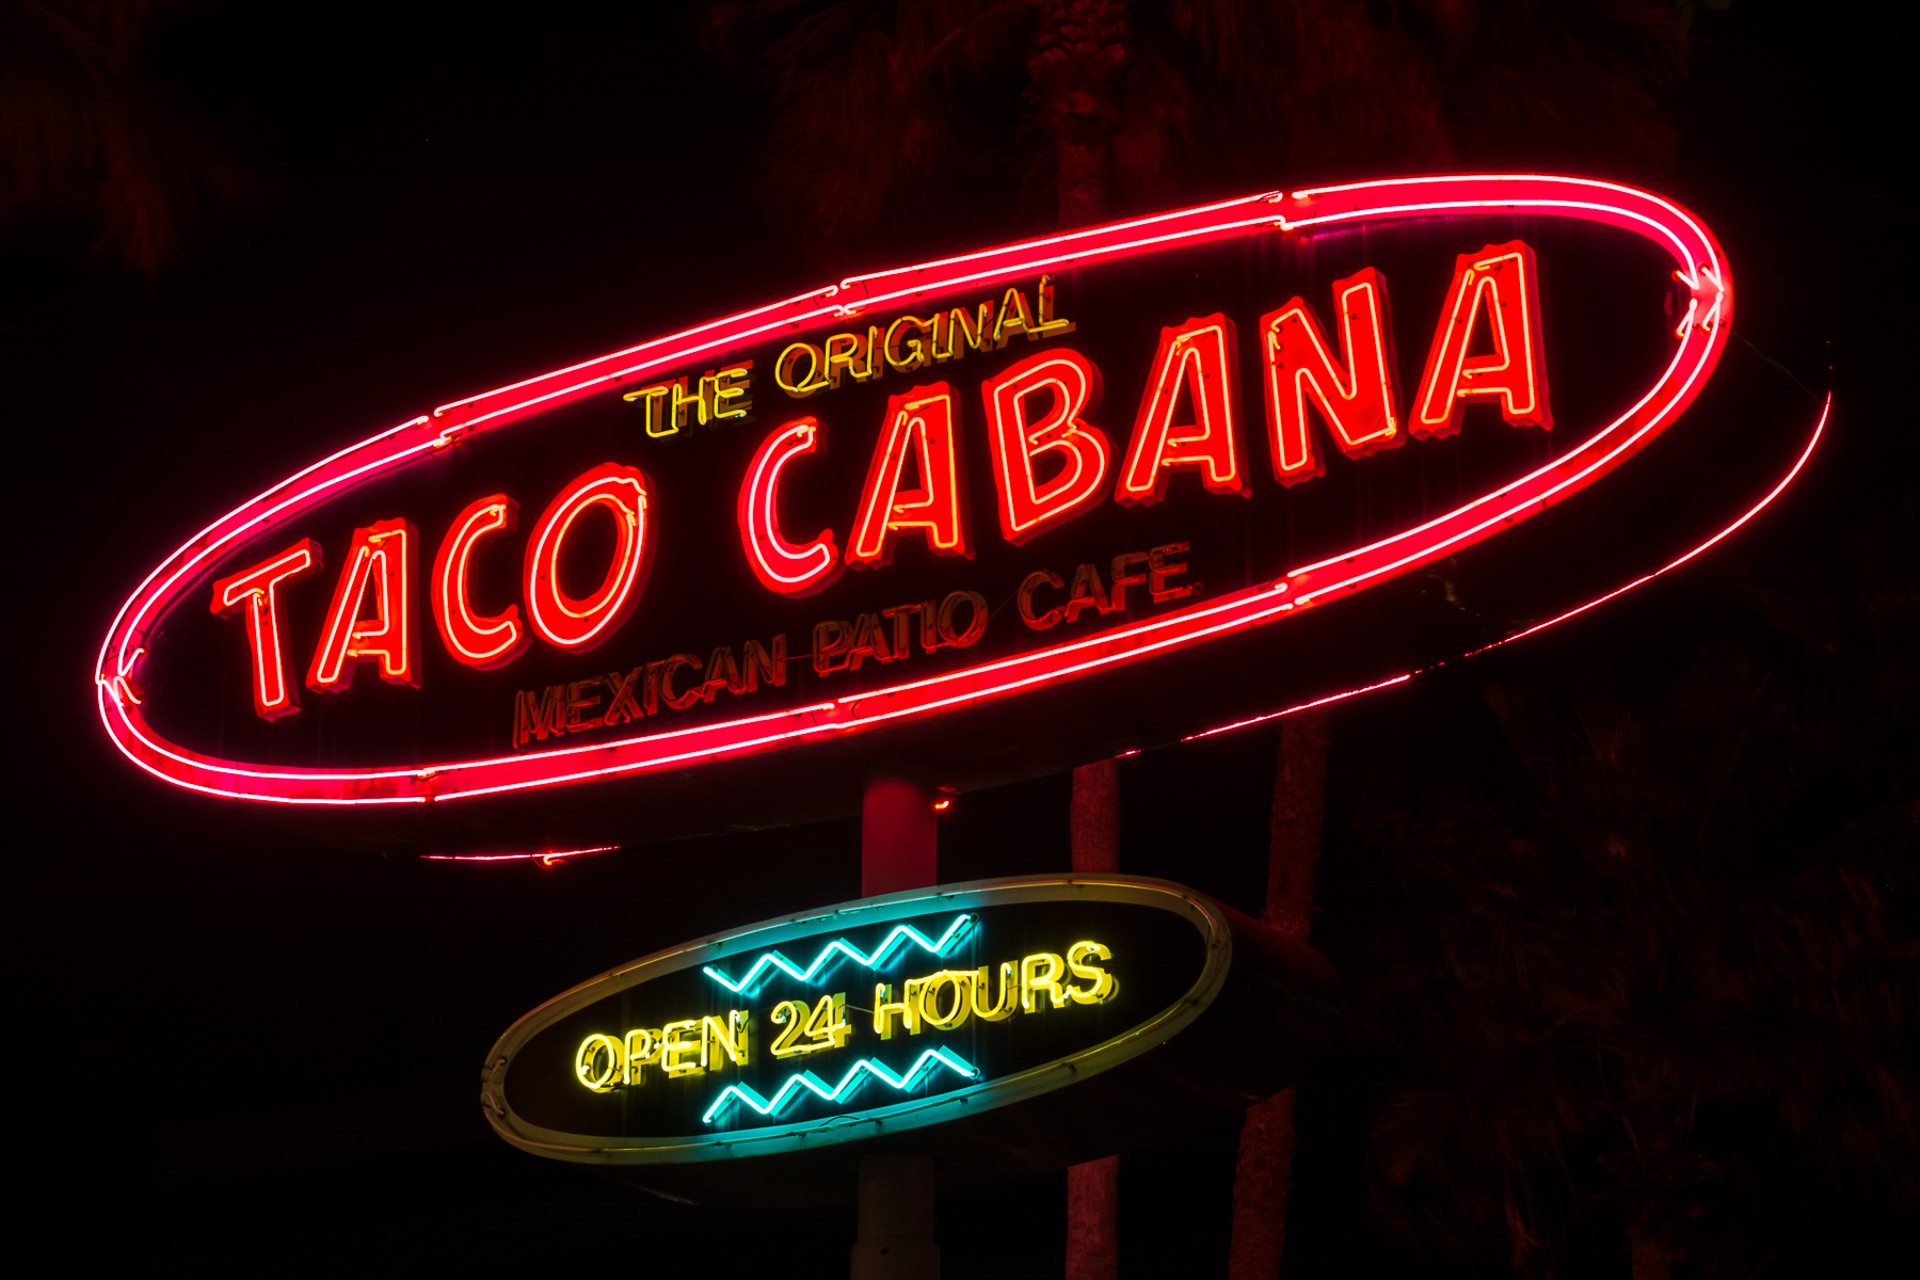 Taco Cabana by James C. Ritchie